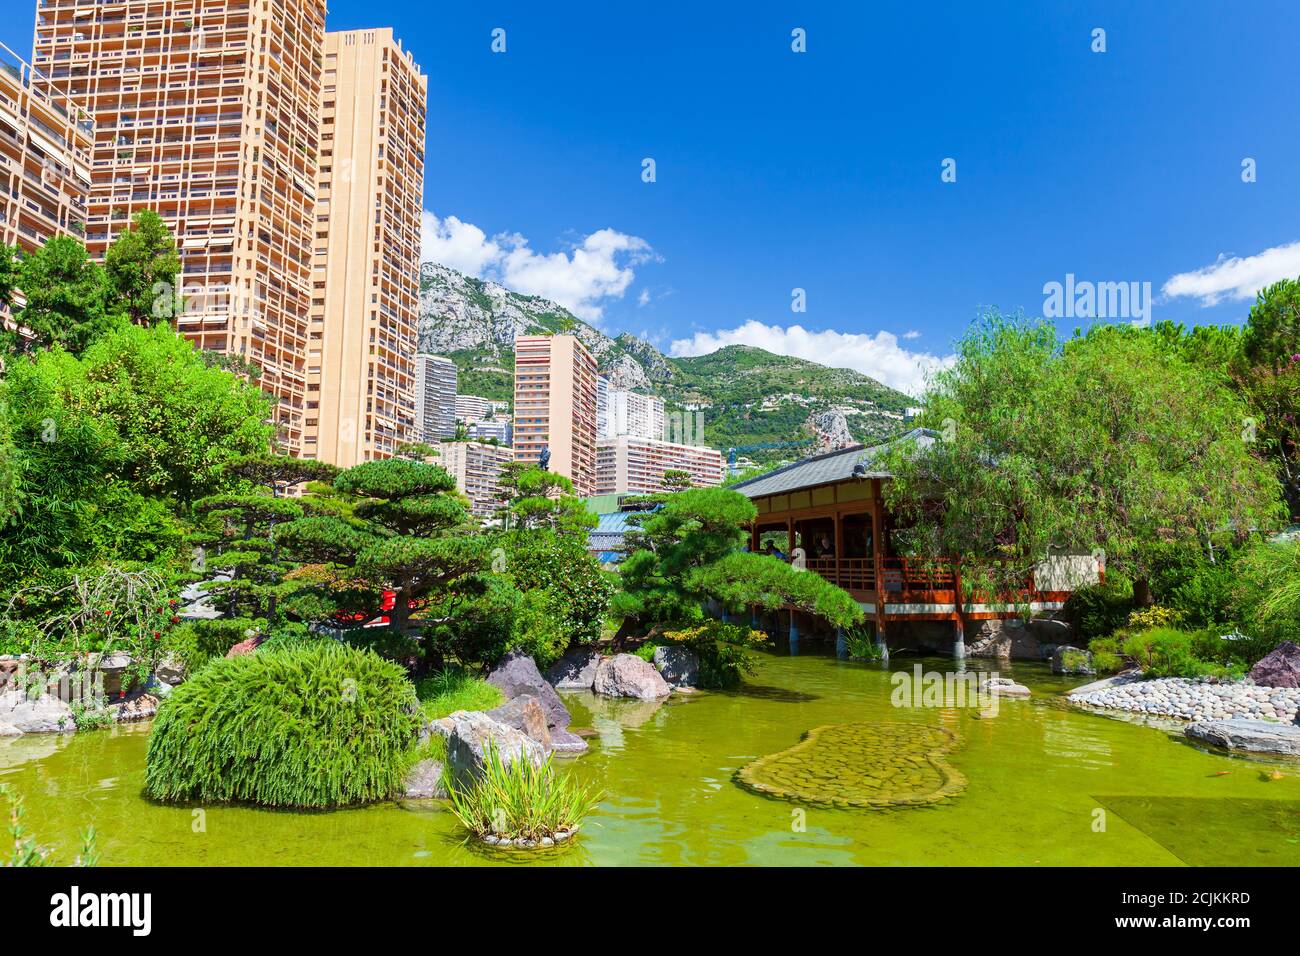 Monte Carlo, Monaco - August 15, 2018: Jardin Japonais de Monaco at sunny day. The Japanese Garden is a municipal park in a city center with free acce Stock Photo